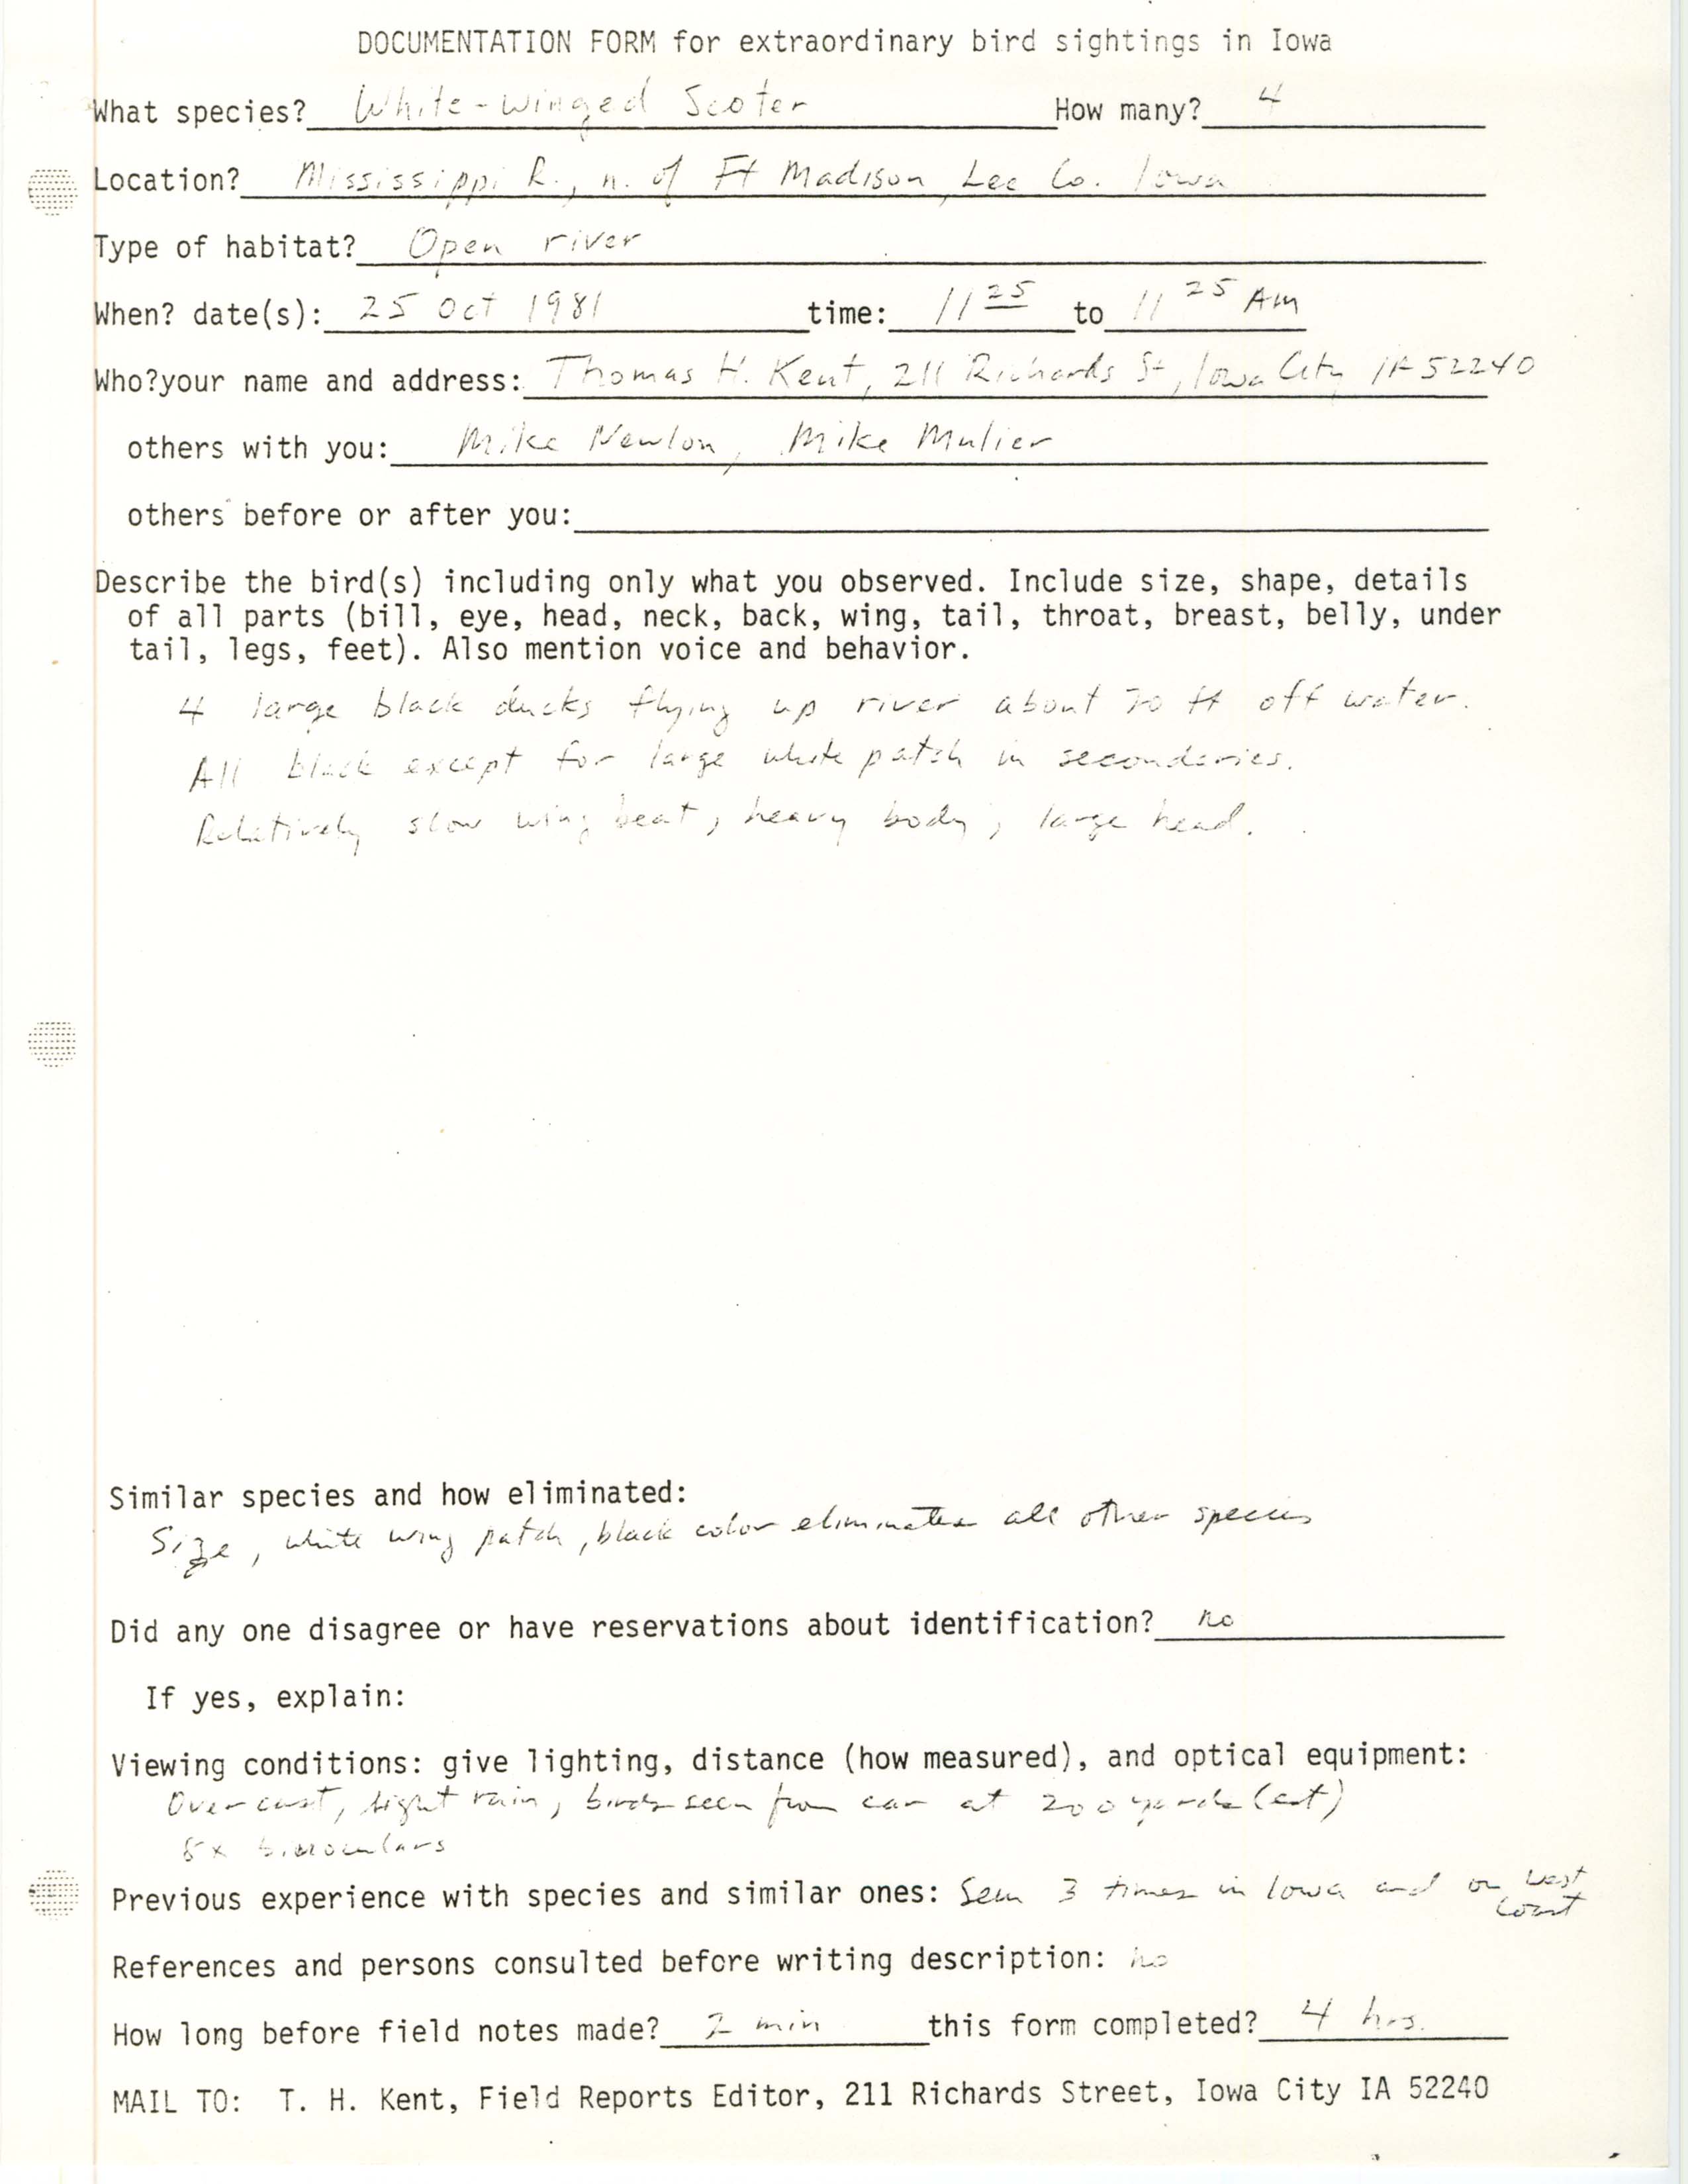 Rare bird documentation form for White-winged Scoter north of Fort Madison in 1981